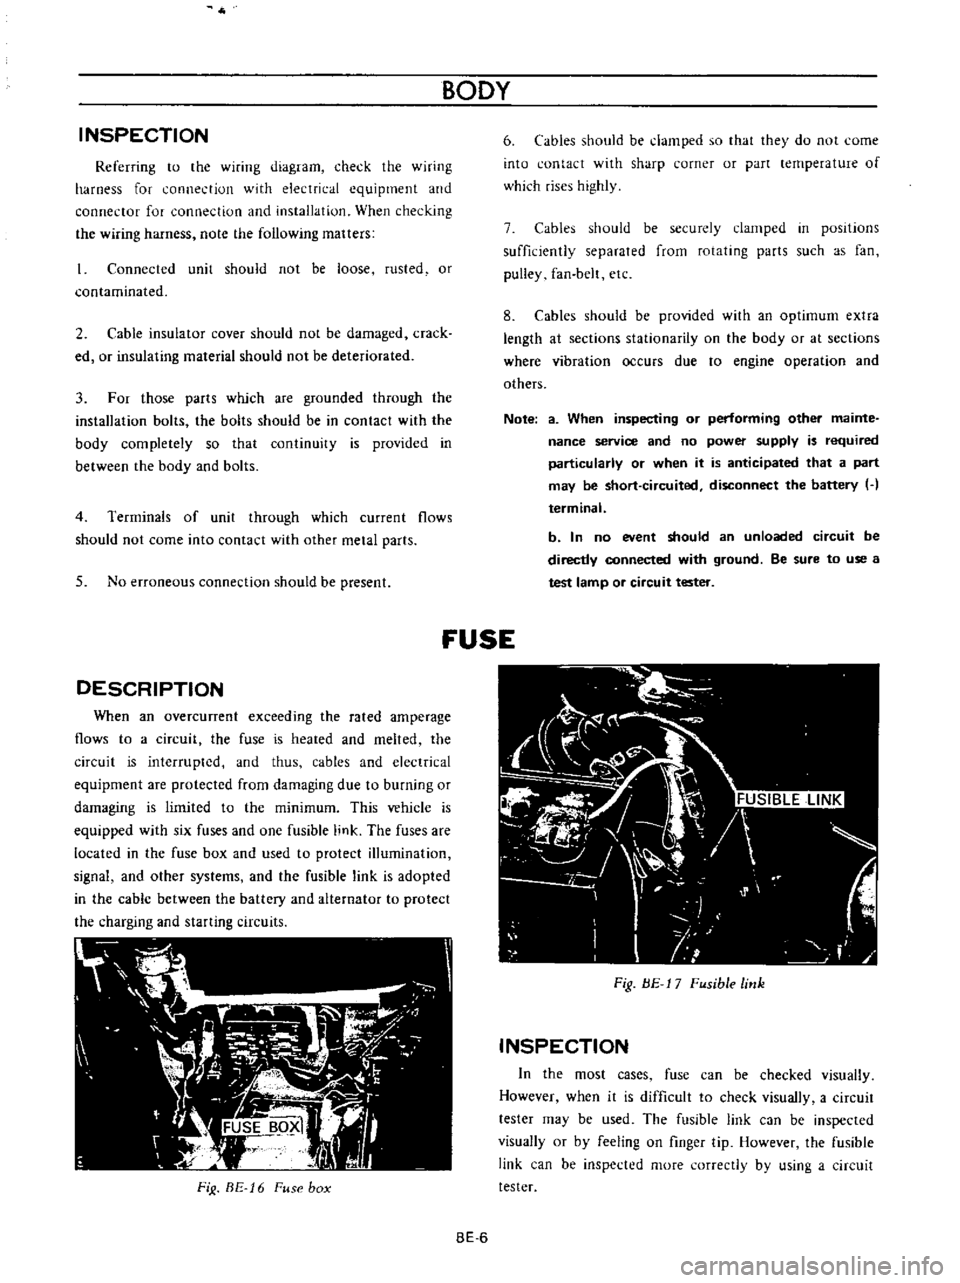 DATSUN B110 1973  Service User Guide 
INSPECTION

Referring 
to 
the

wiring 
diagram 
check 
the

wiring

harness

for 
connection 
with 
electrical

equipment 
and

connector 
for 
conned 
ion 
and 
installation 
When

checking

the

w